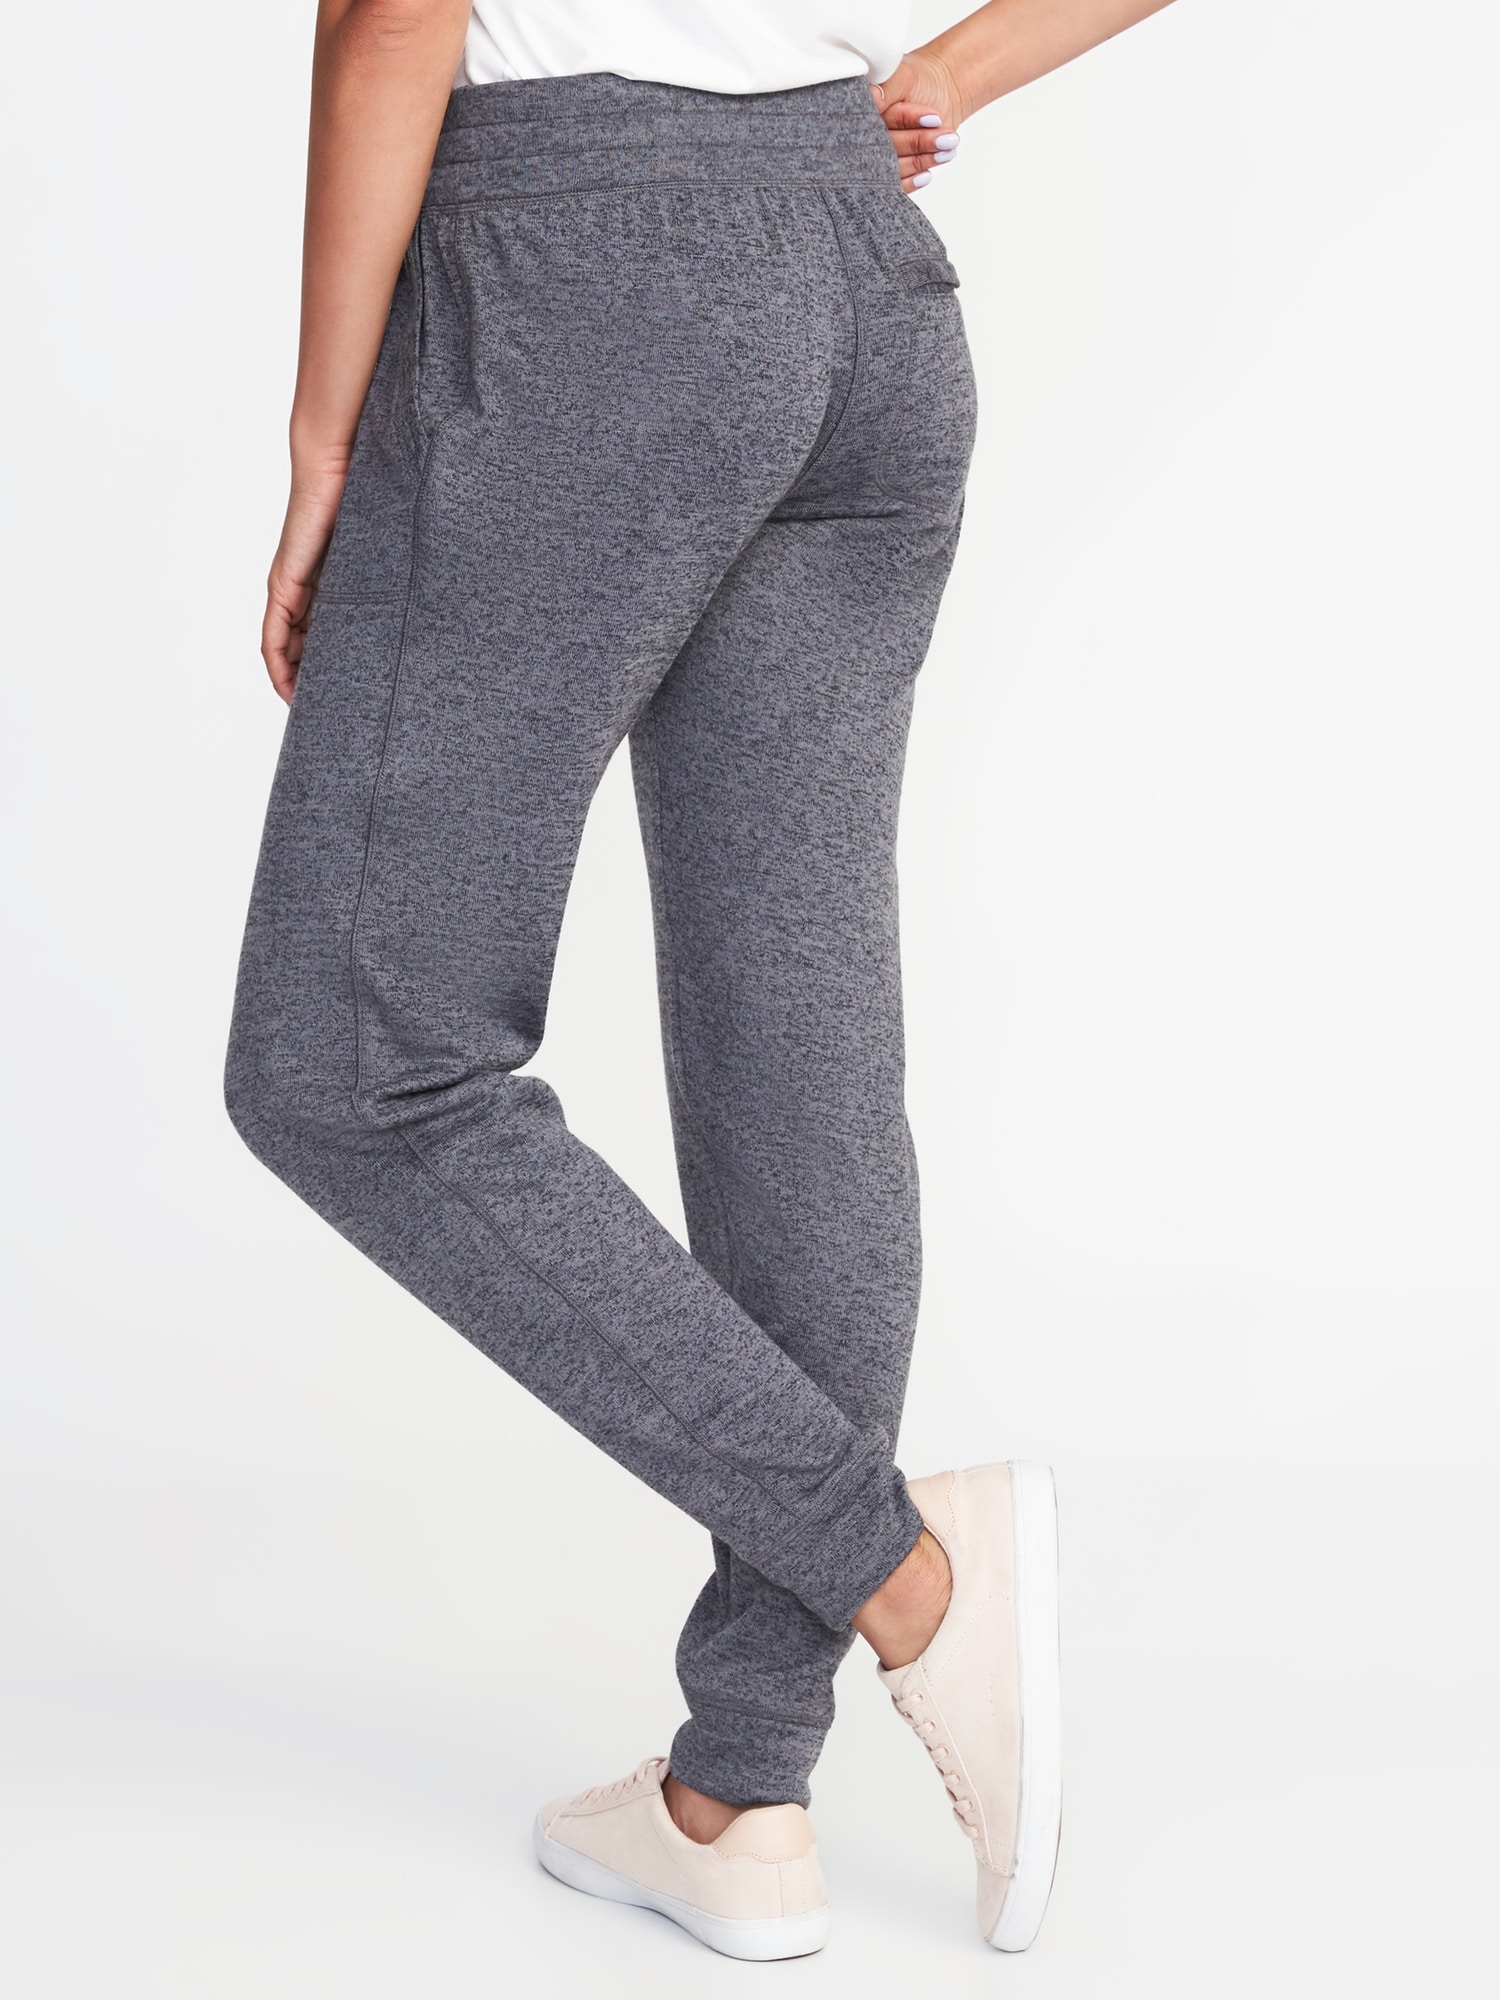 13 Pairs of Cozy Winter Pants from , Old Navy, Lululemon